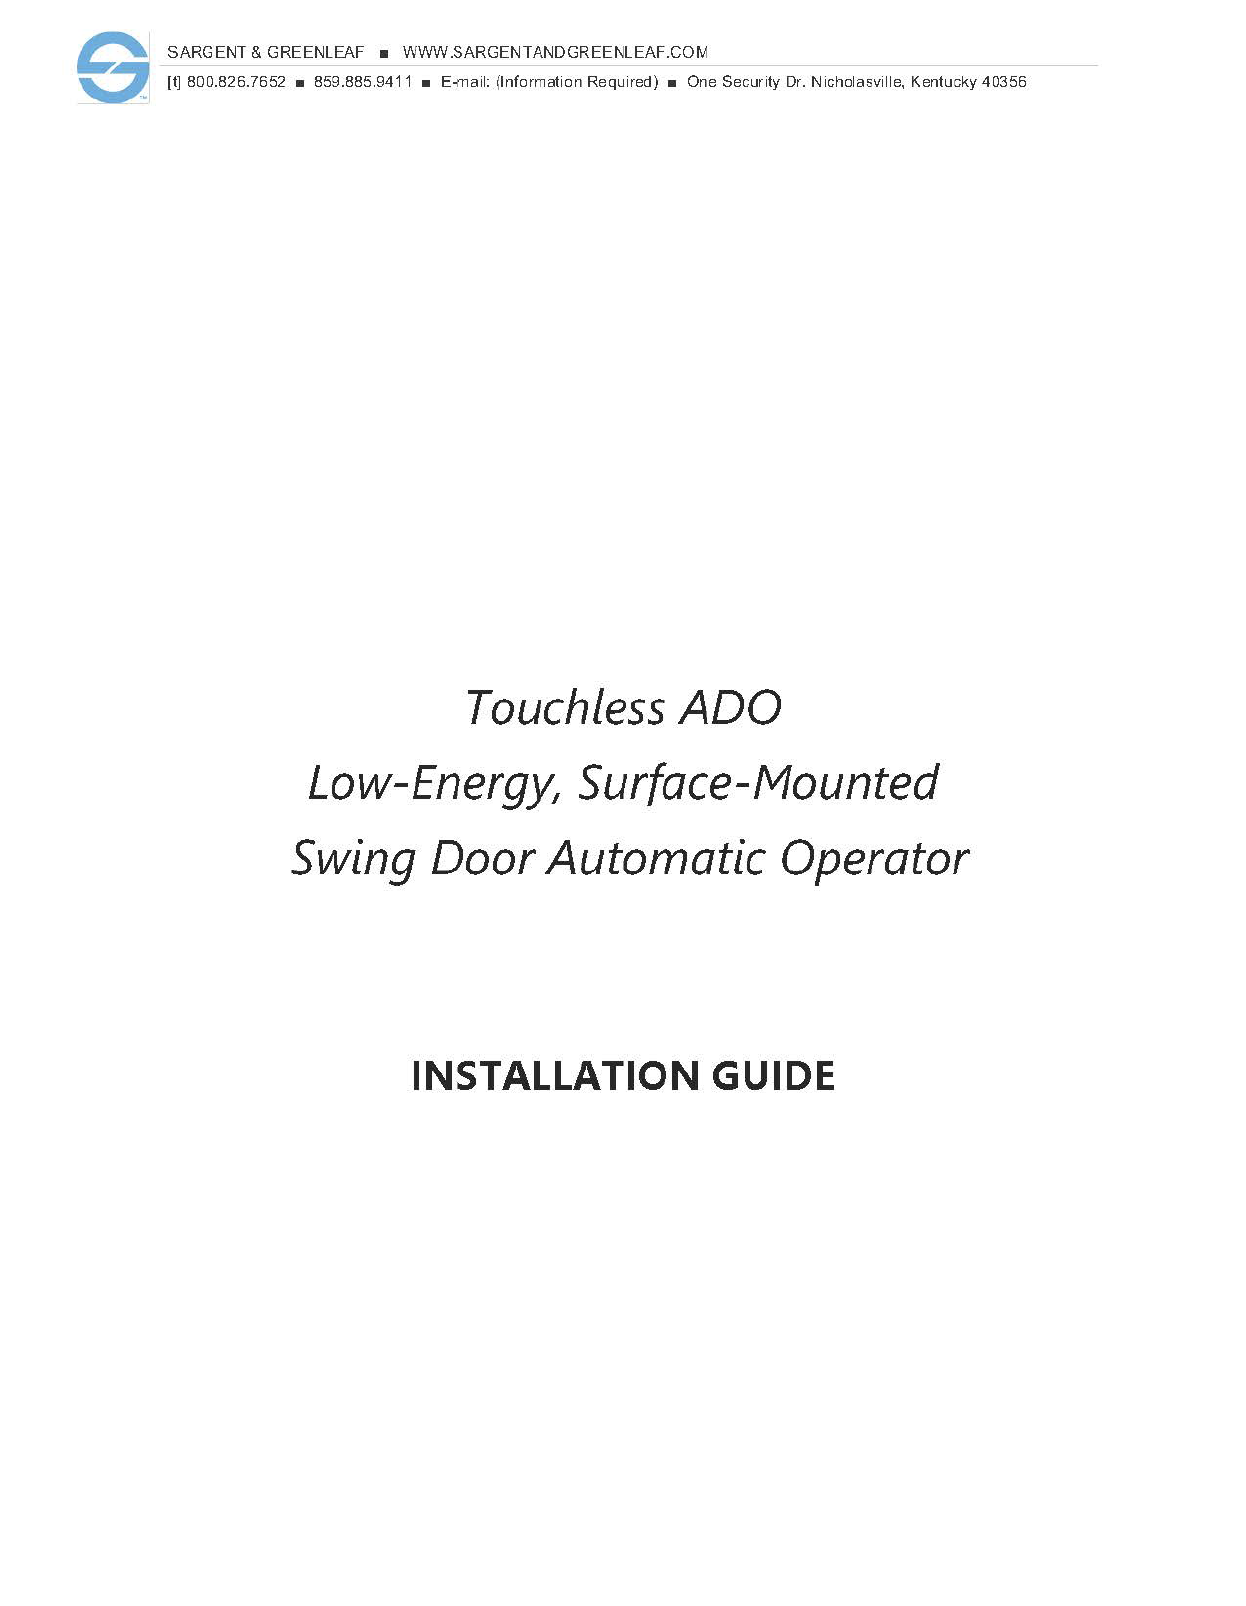 Touchless ADO Installation Guide